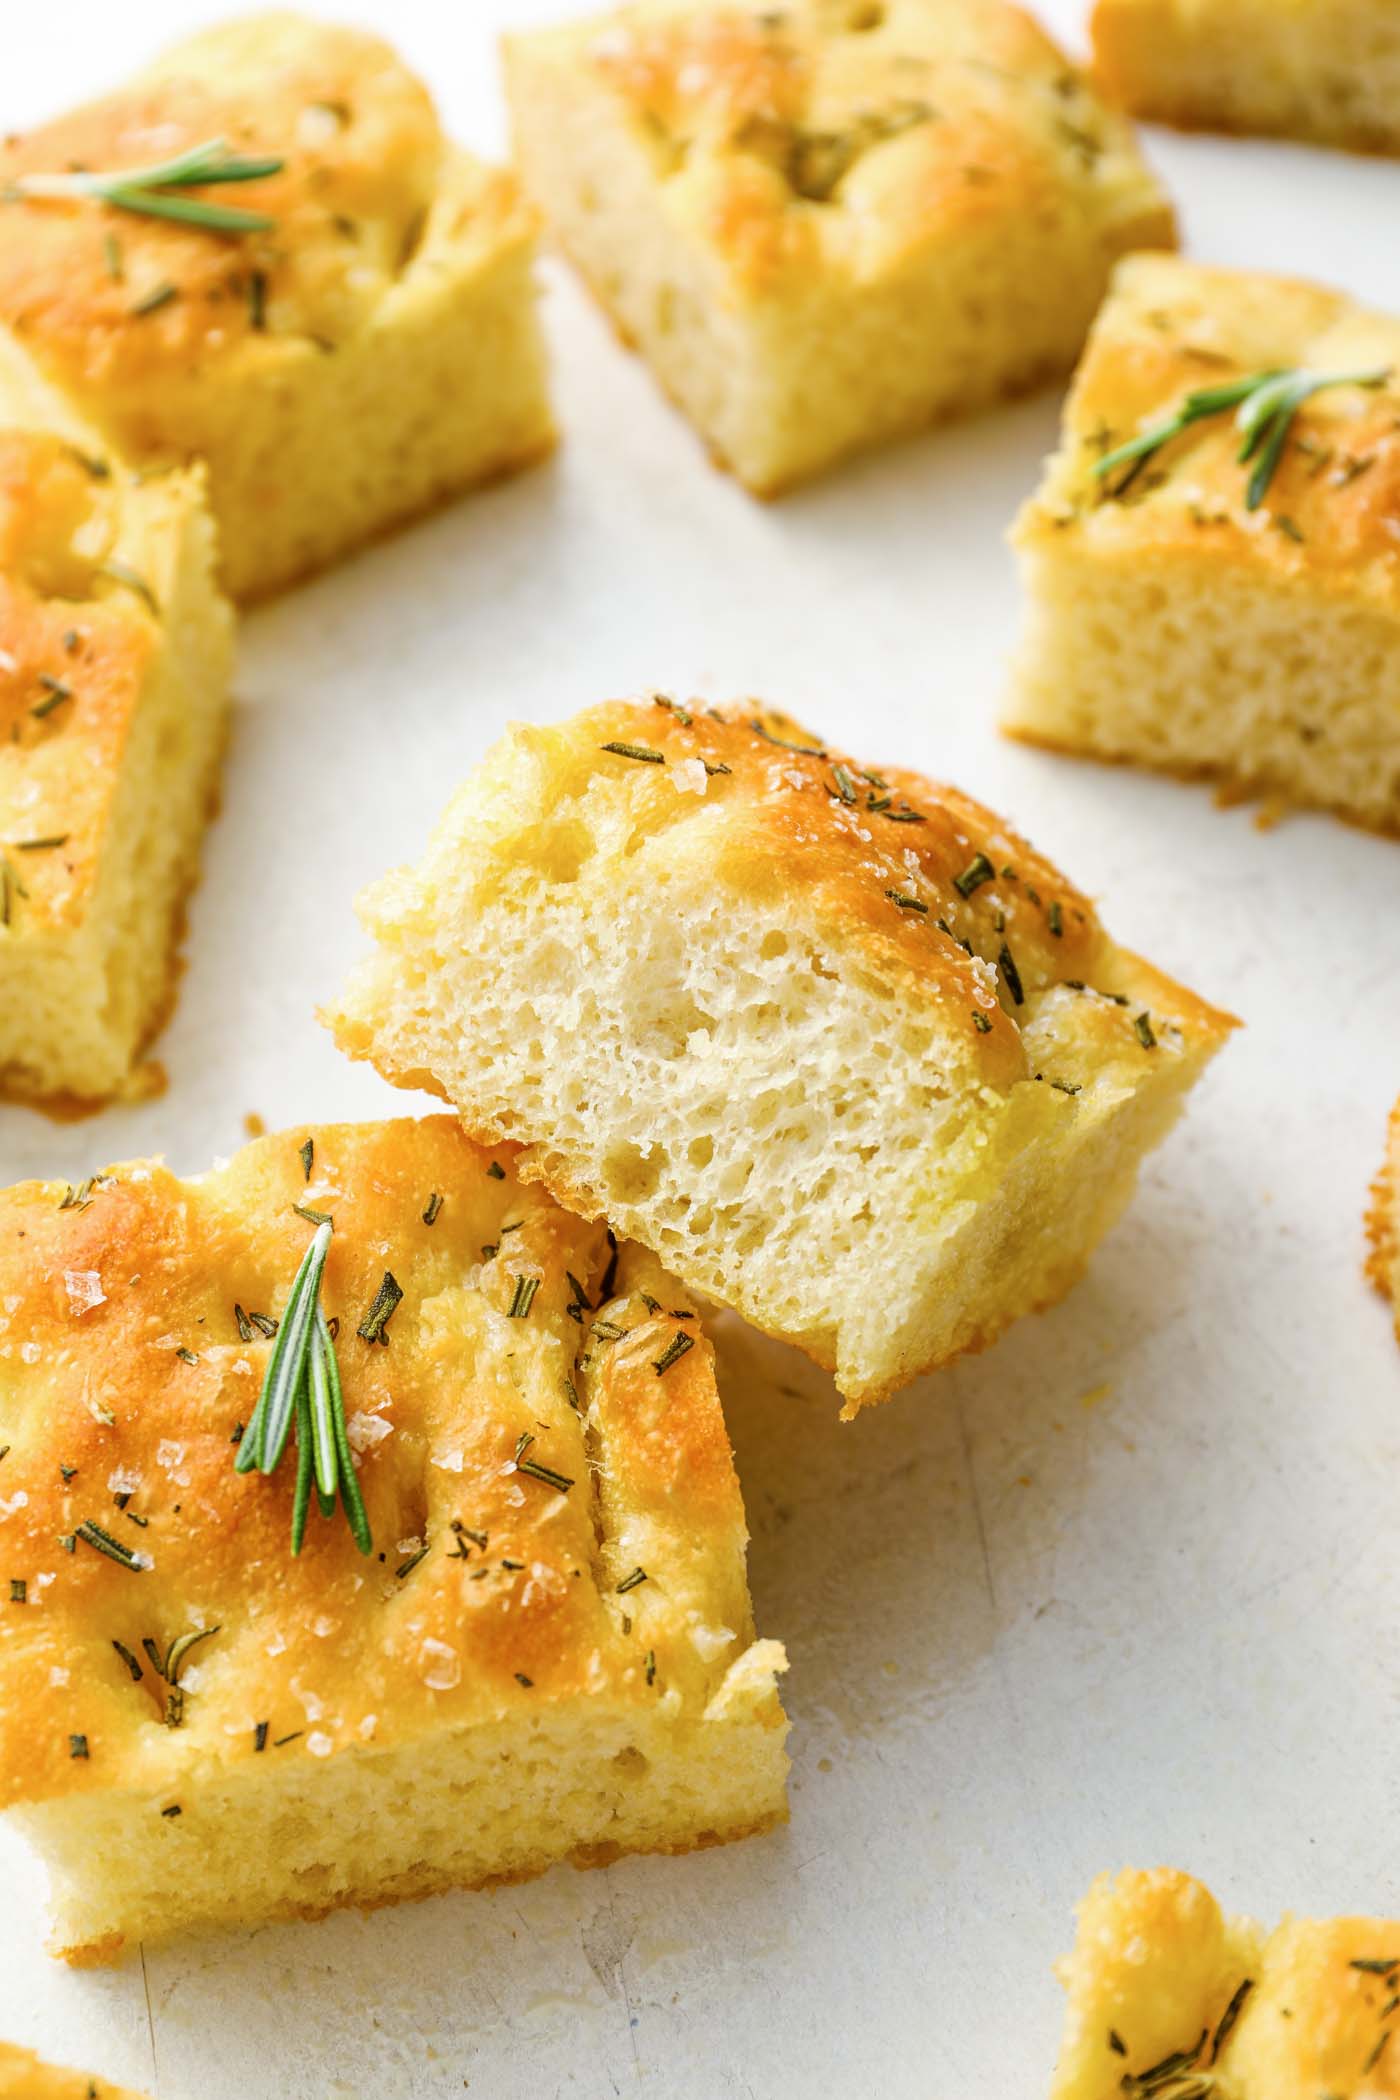 Cut slices of focaccia with one slice resting on another to show the airy texture.